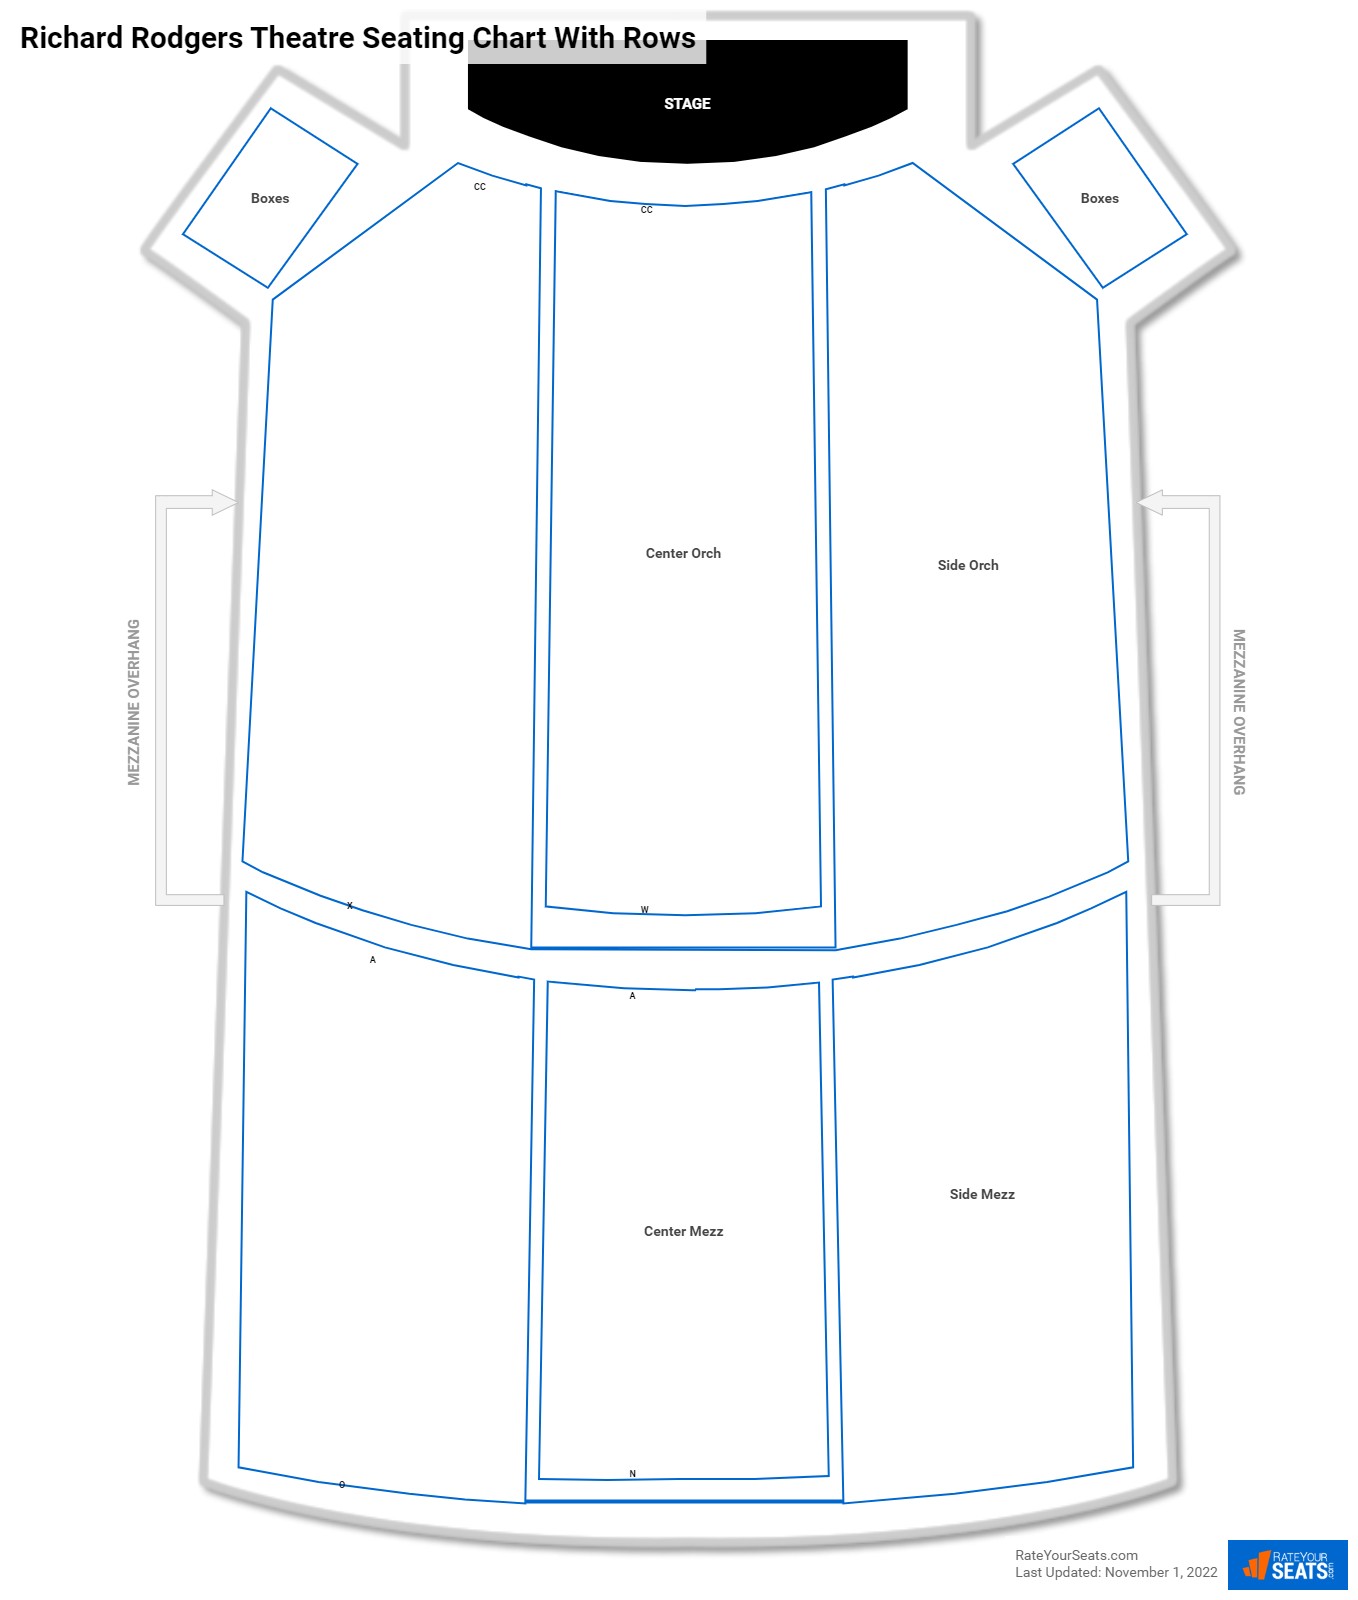 Richard Rodgers Theatre seating chart with row numbers